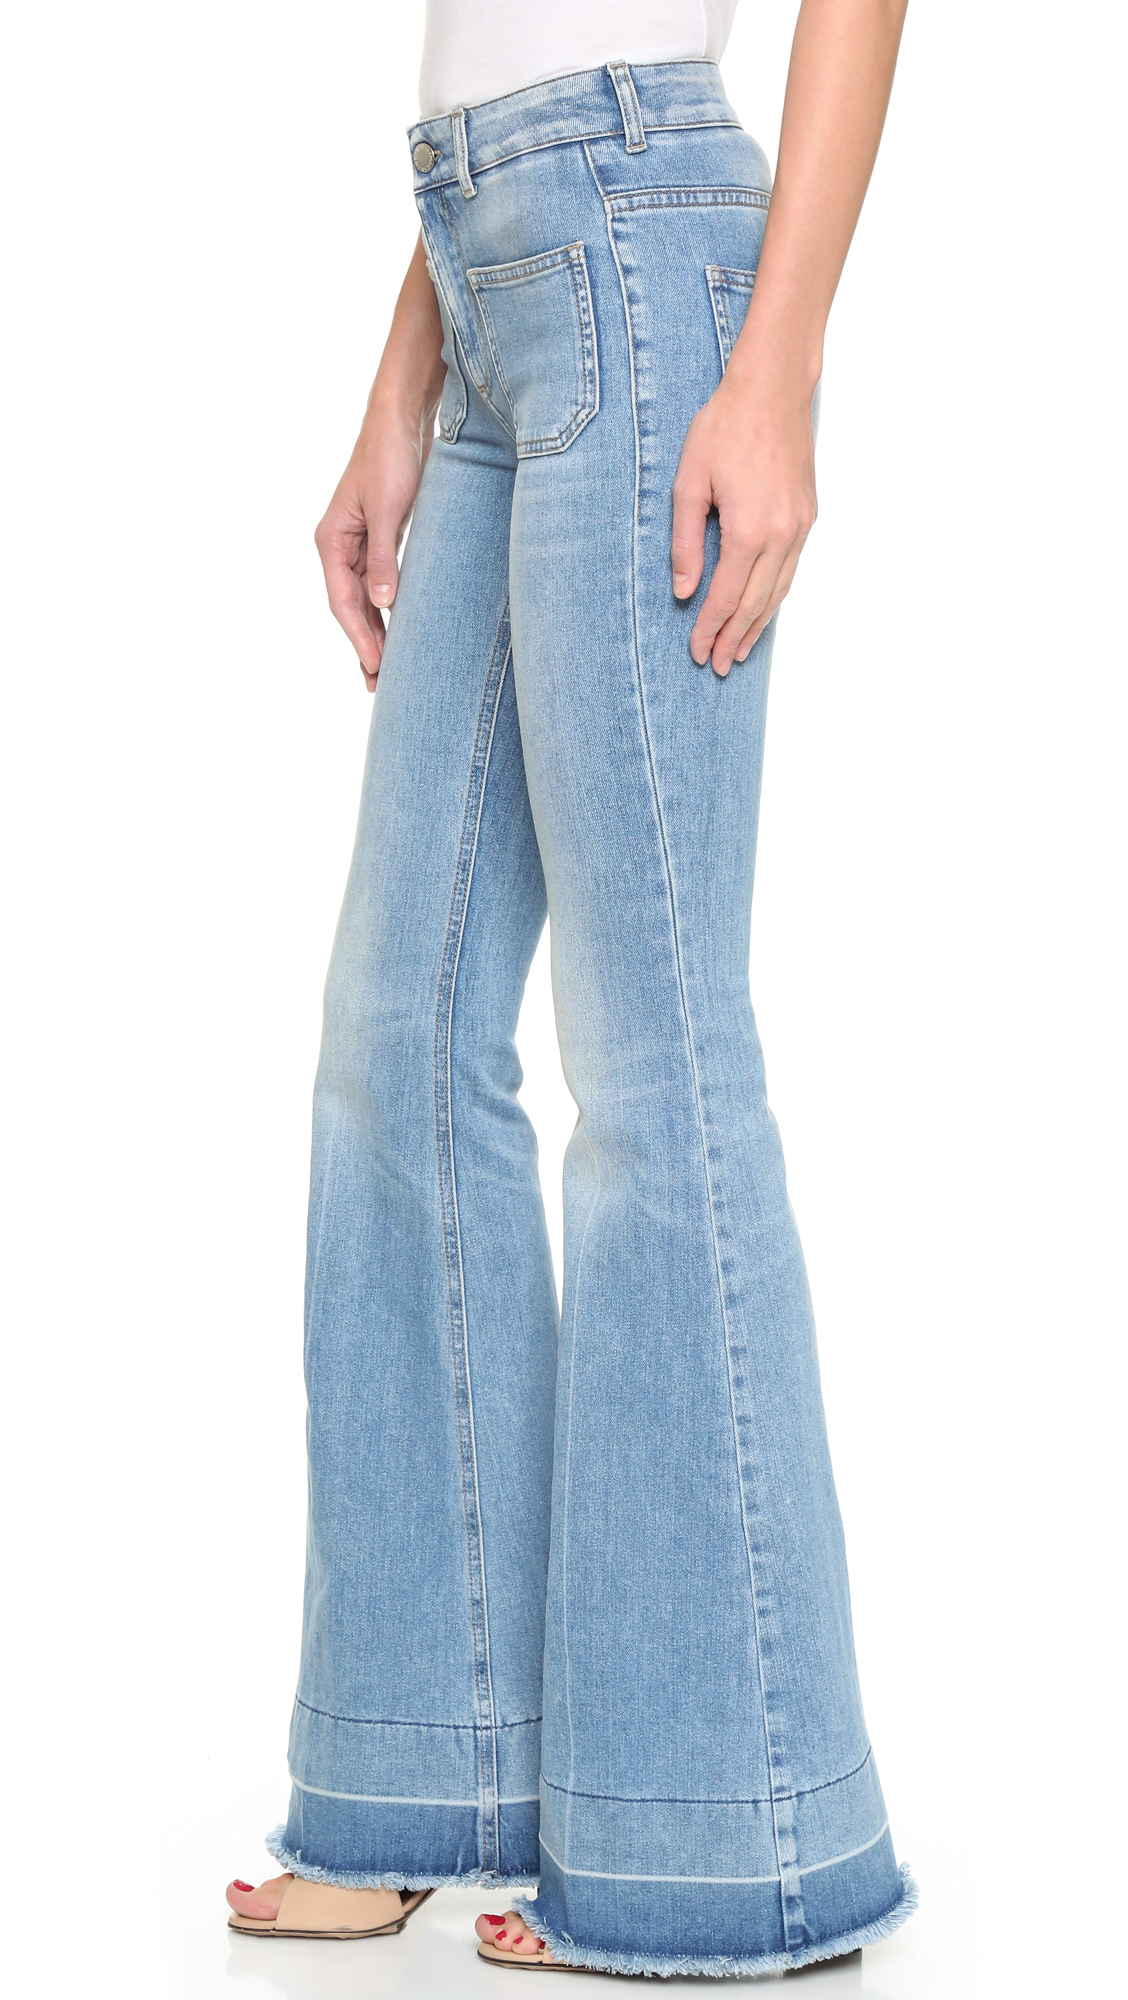 Lyst - Stella Mccartney 70s Flare Jeans With Patch Pockets in Blue